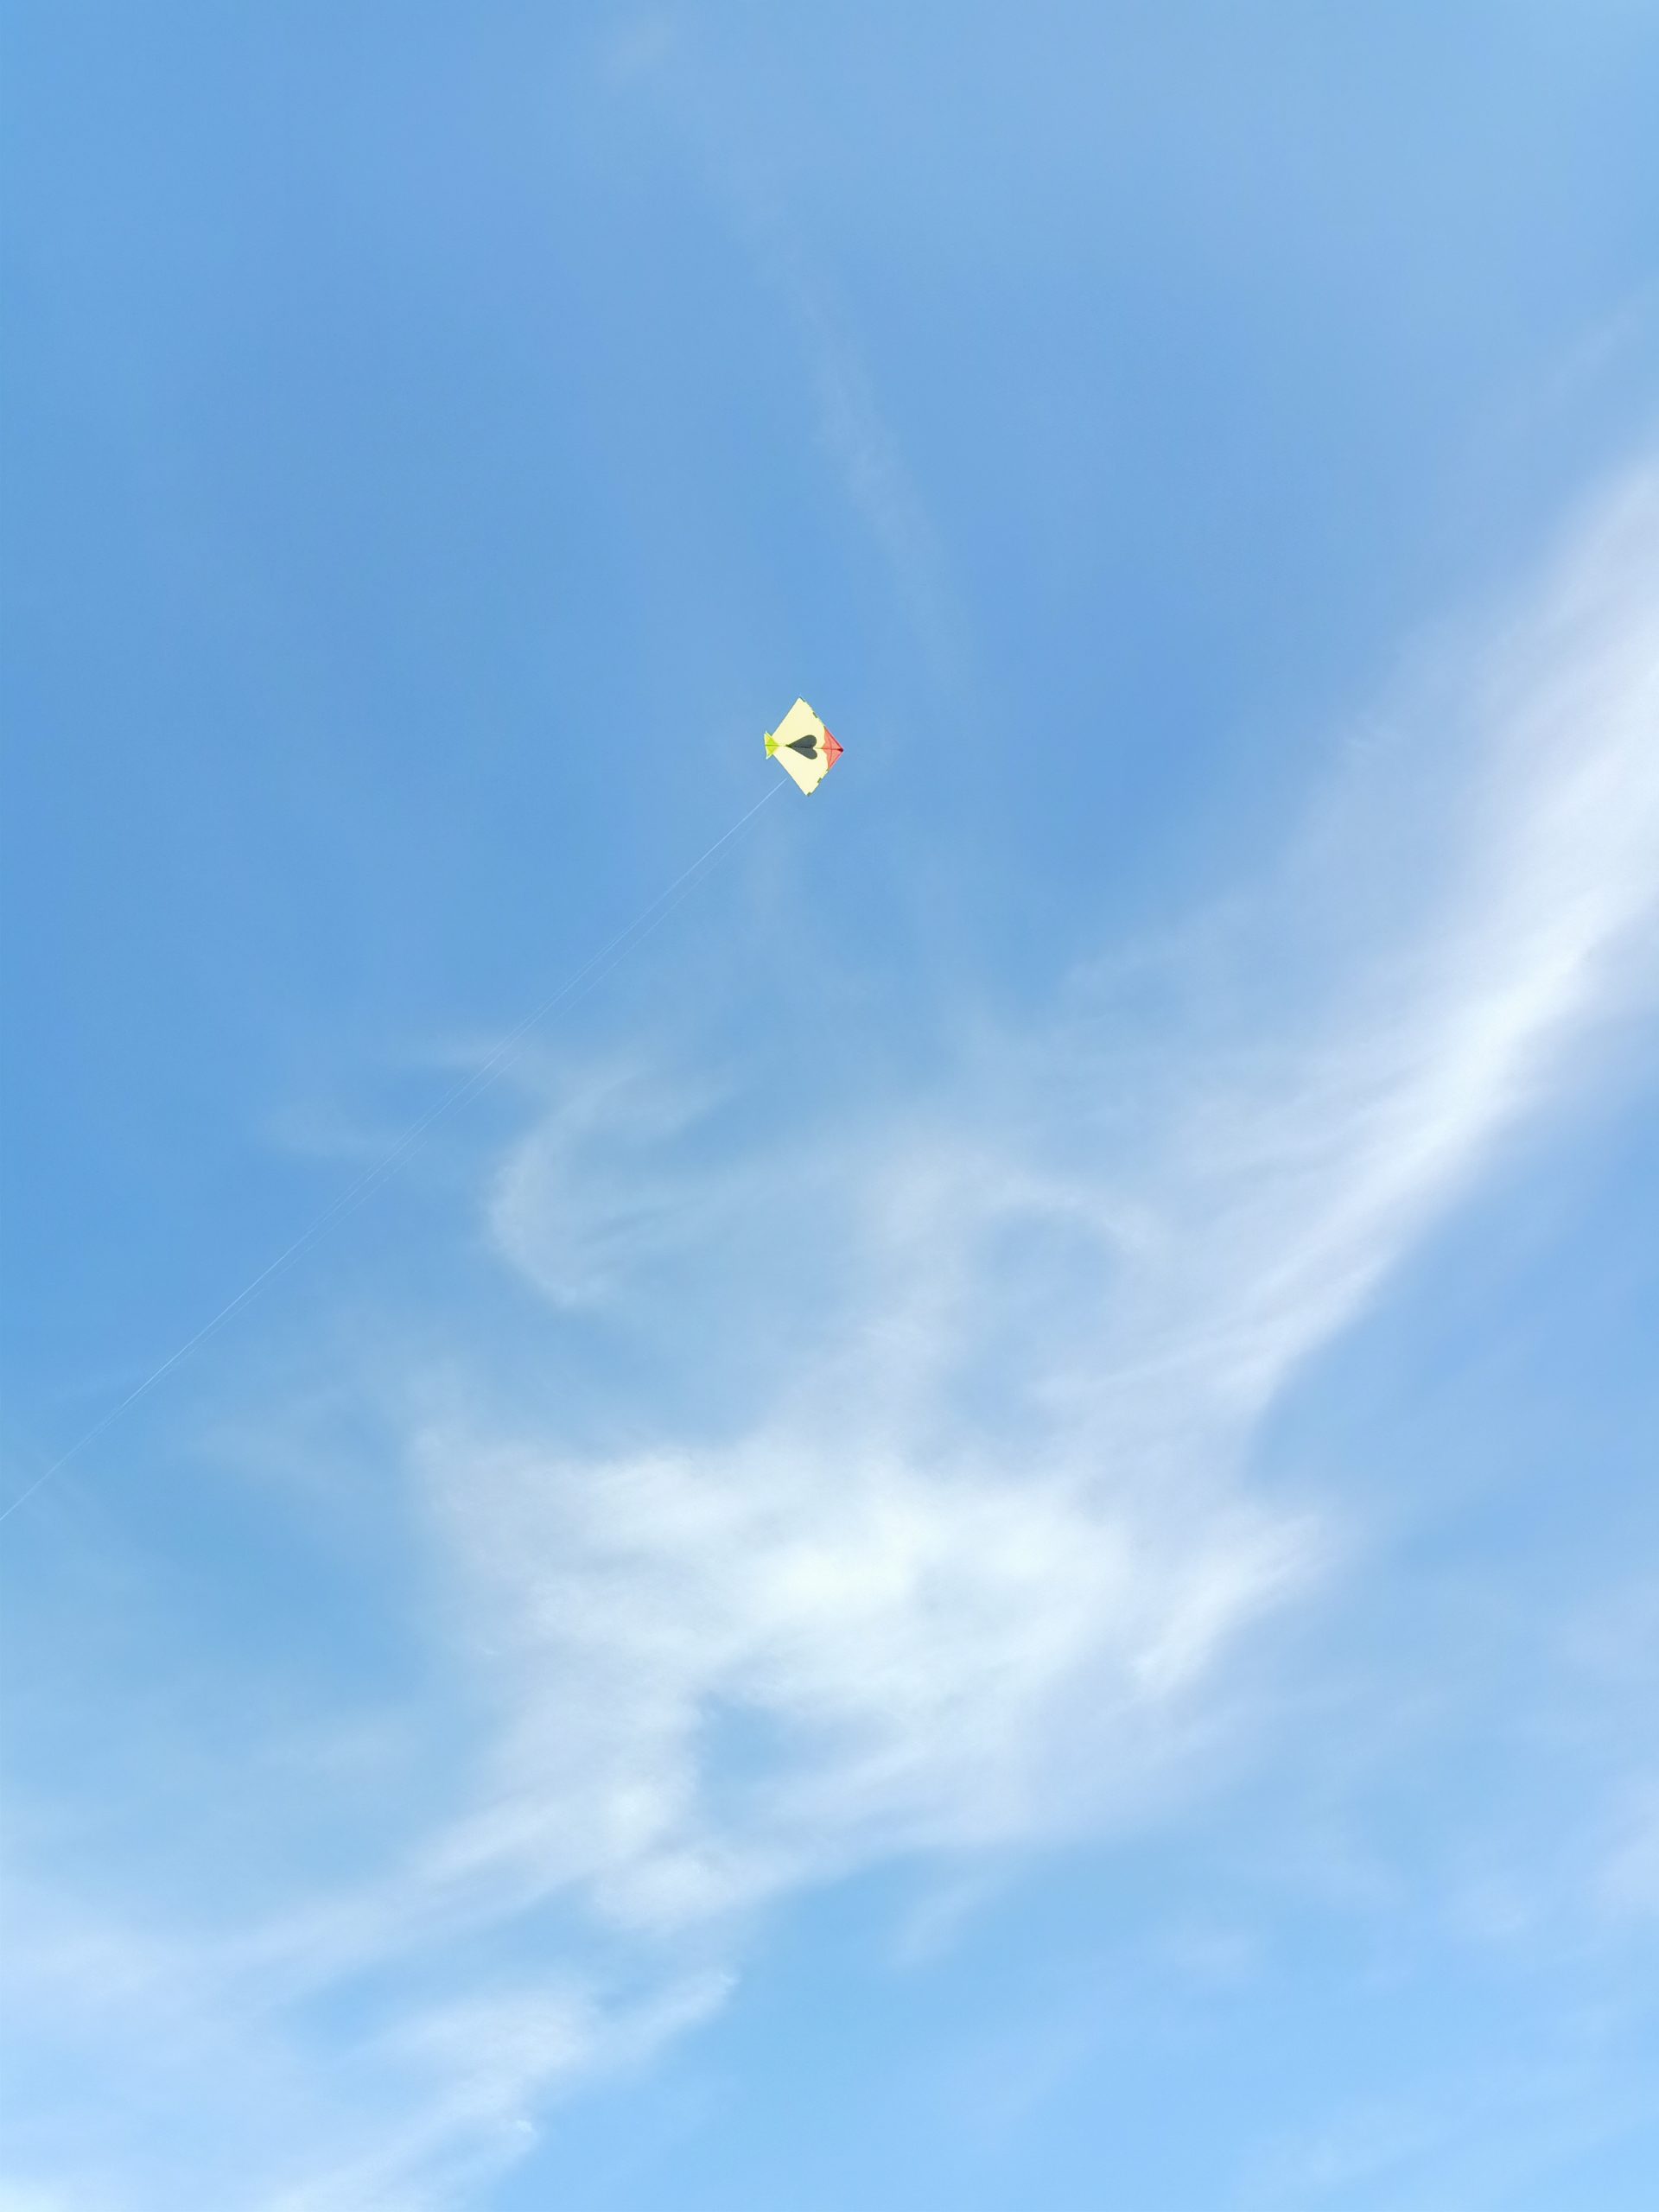 Kite flying in the clear sky